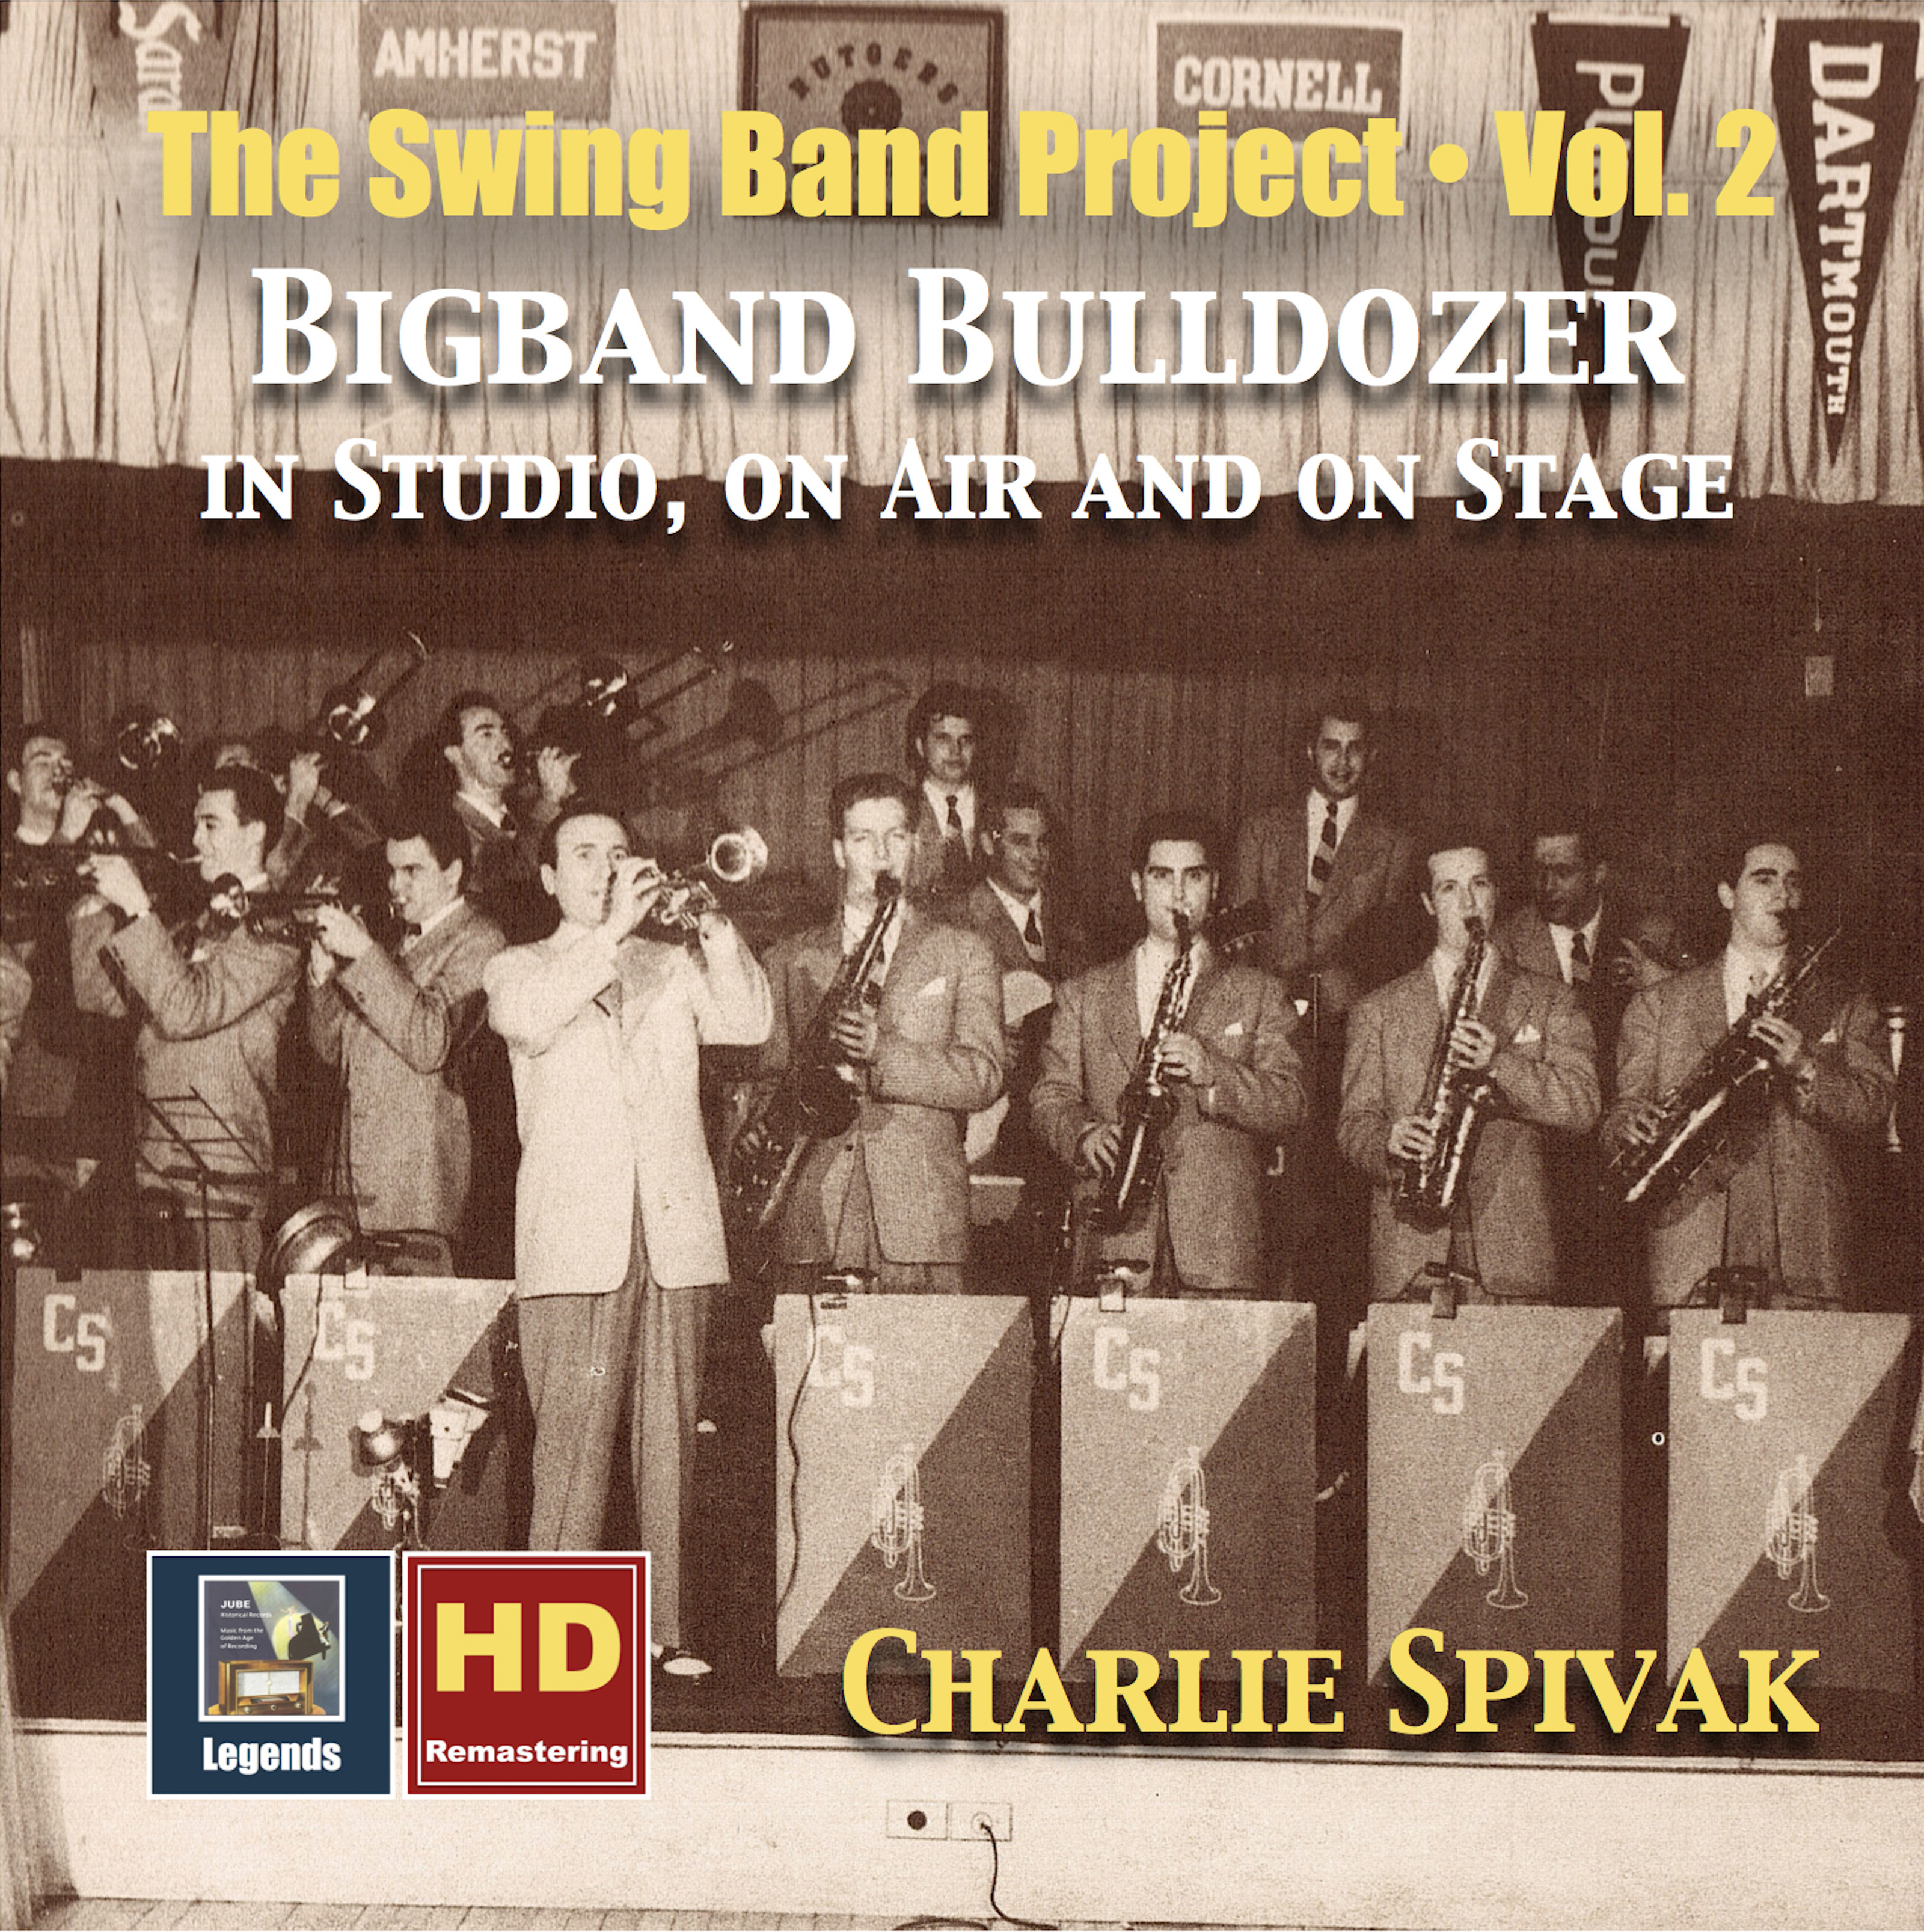 The Swing Band Project, Vol. 2: Charlie Spivak  Big Band Bulldozer in Studio, on Air and on Stage